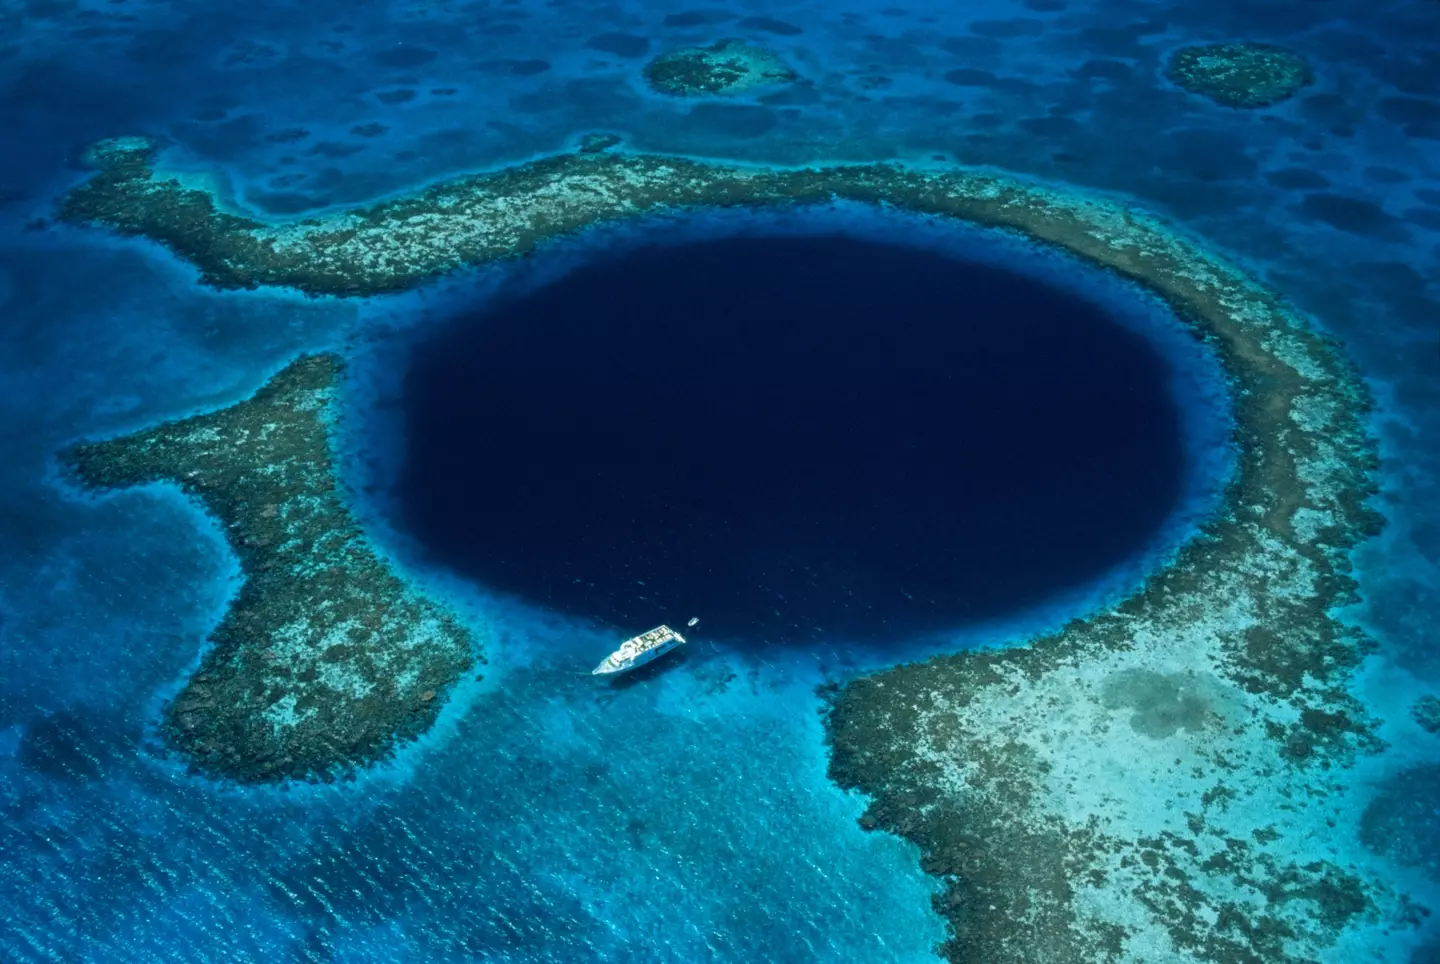 The Great Blue Hole certainly earns its name by appearance alone.